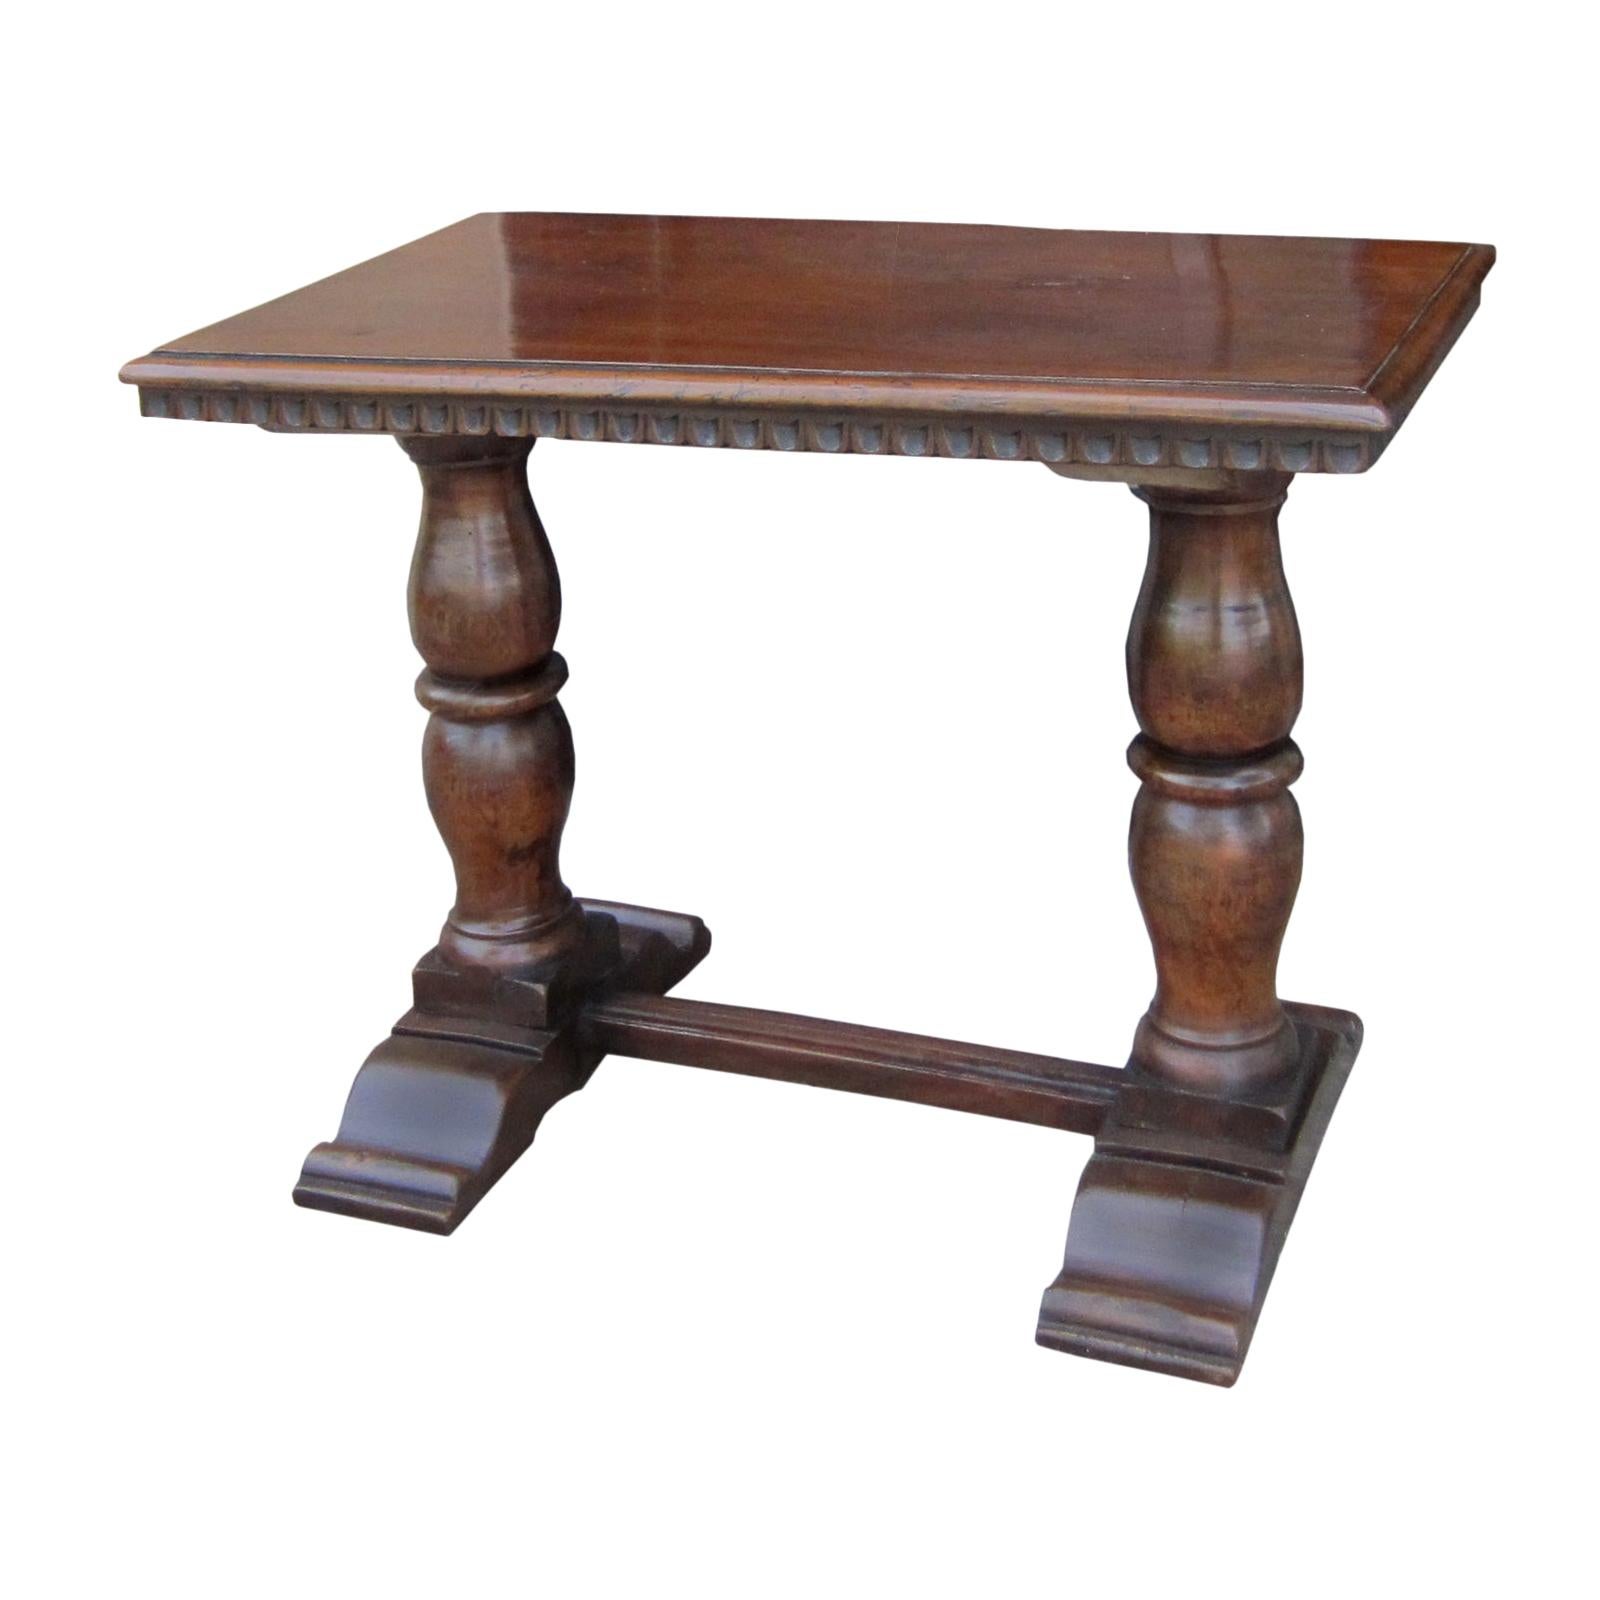 19th-20th Century Italian Style Trestle Drinks Table Composed of Early Elements